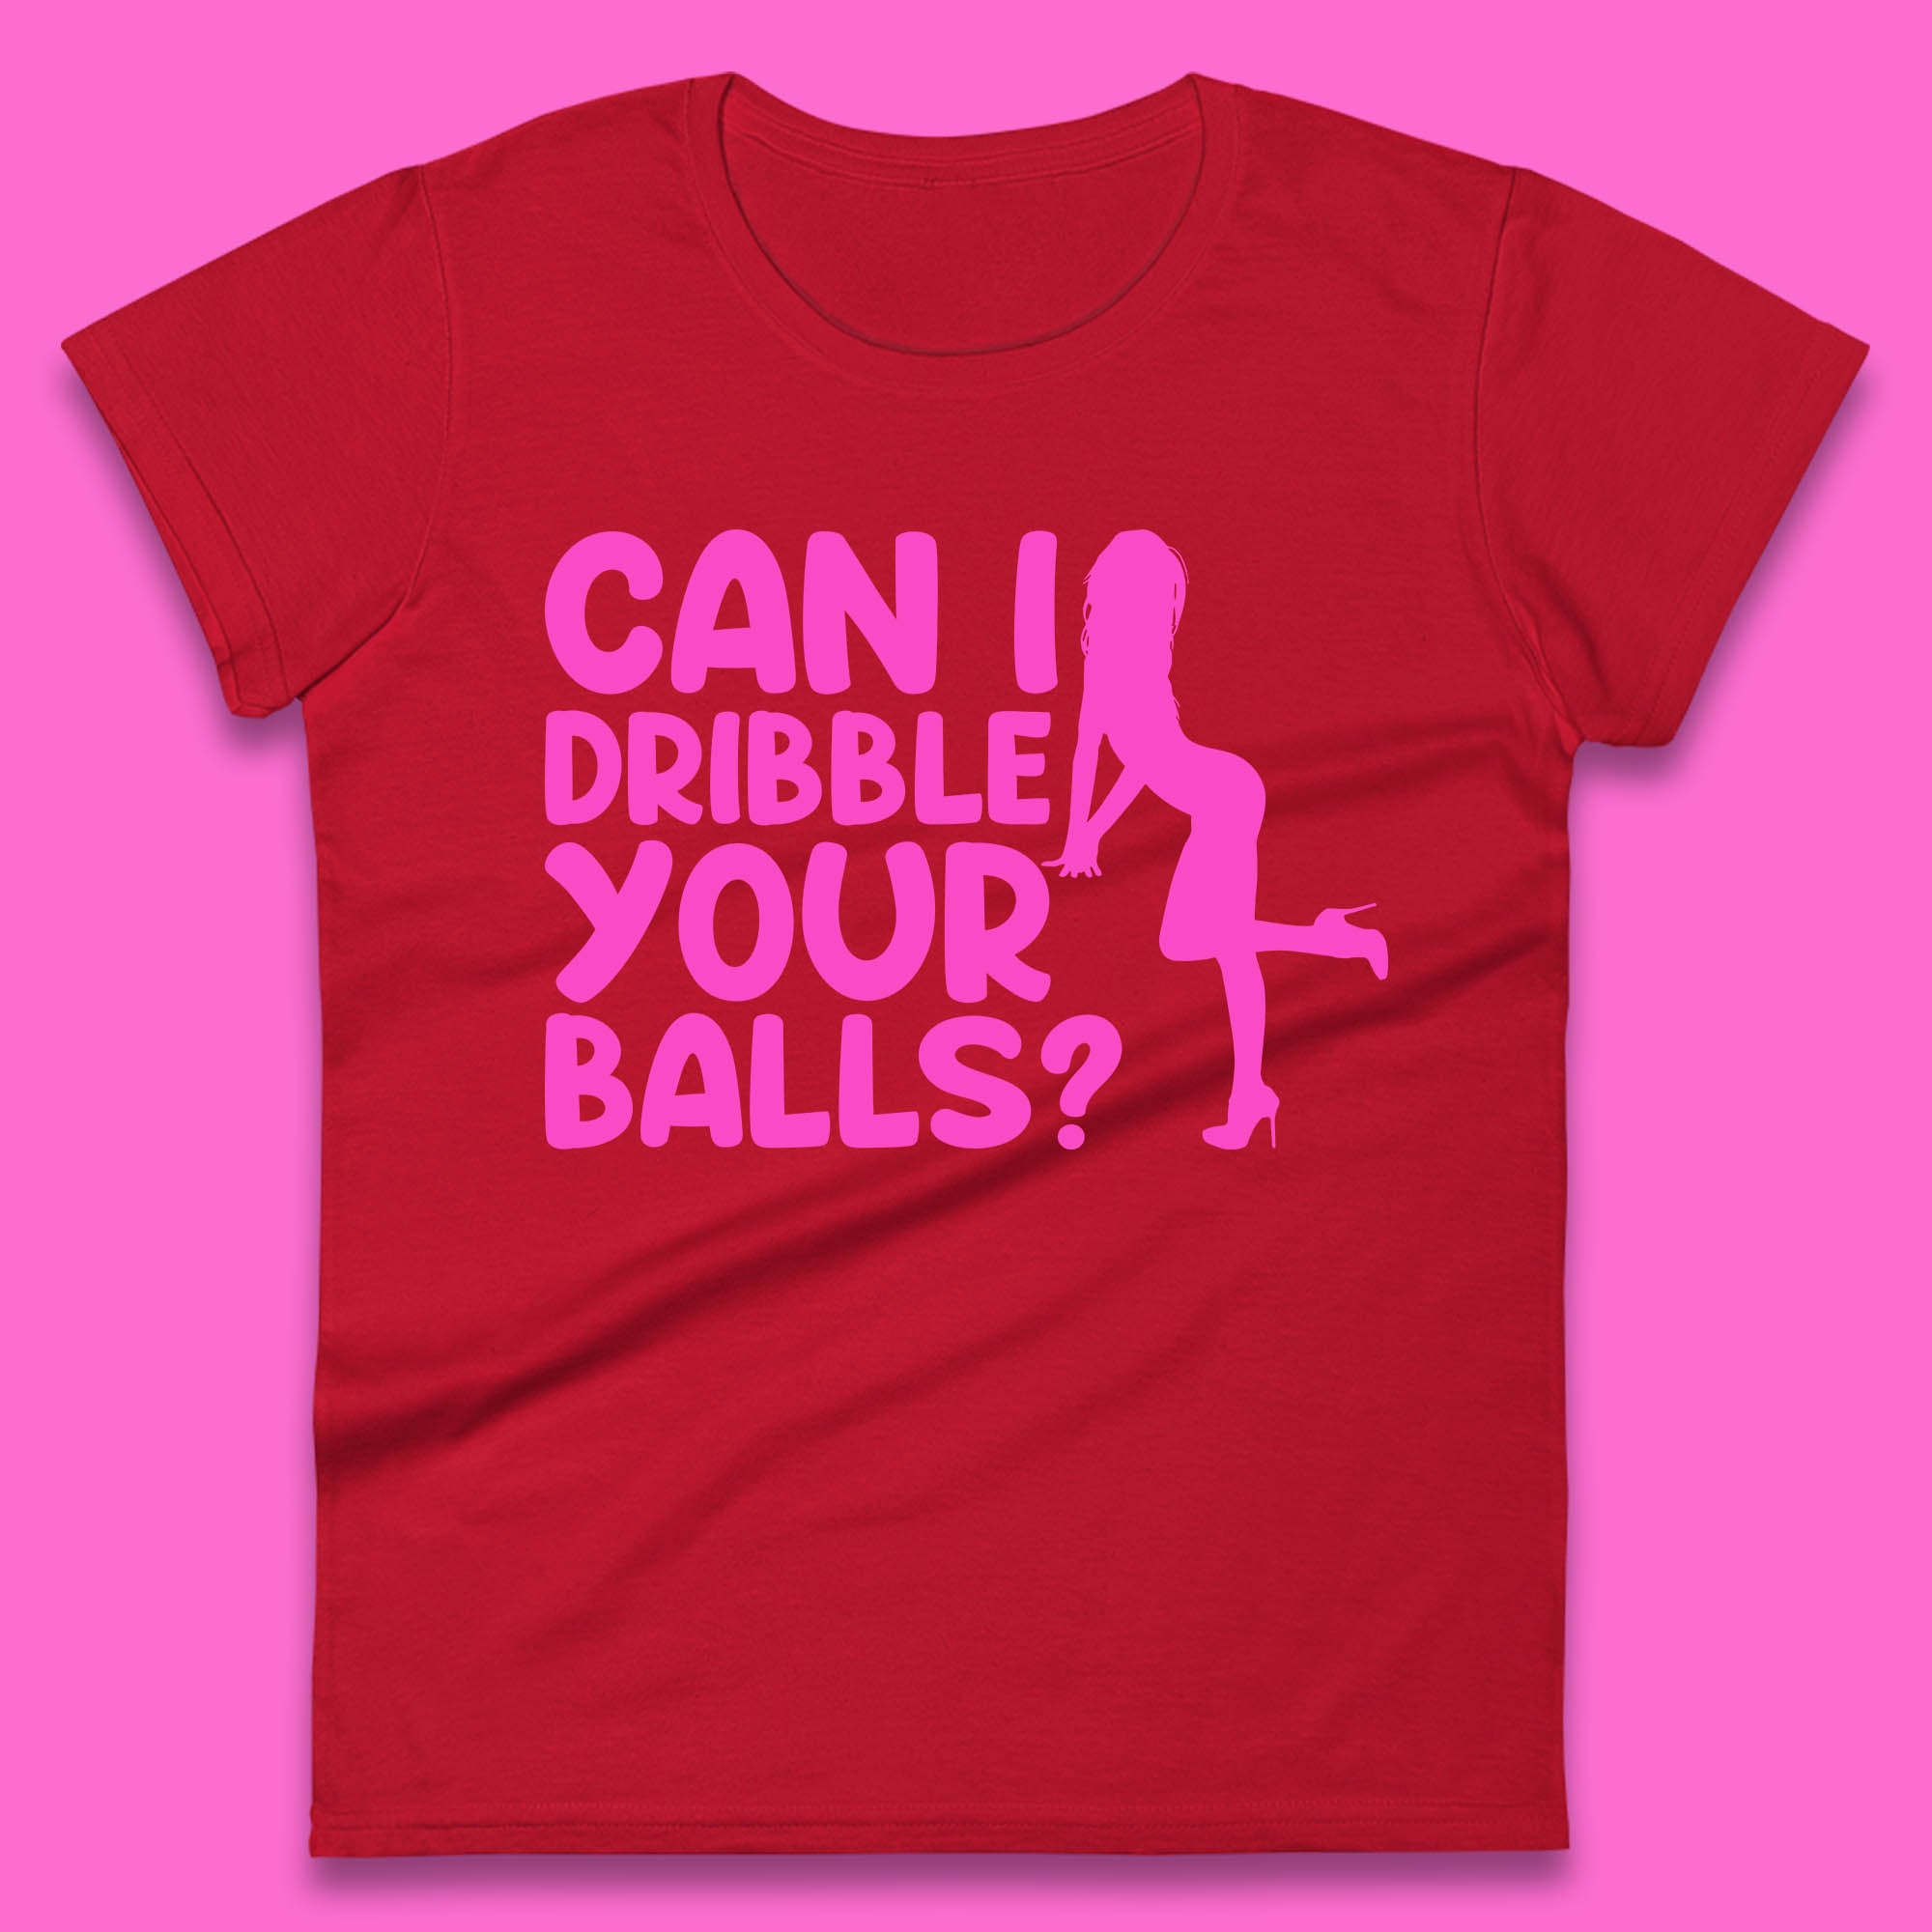 Can I Dribble You Balls? Offensive Adult Humor Gift Womens Tee Top